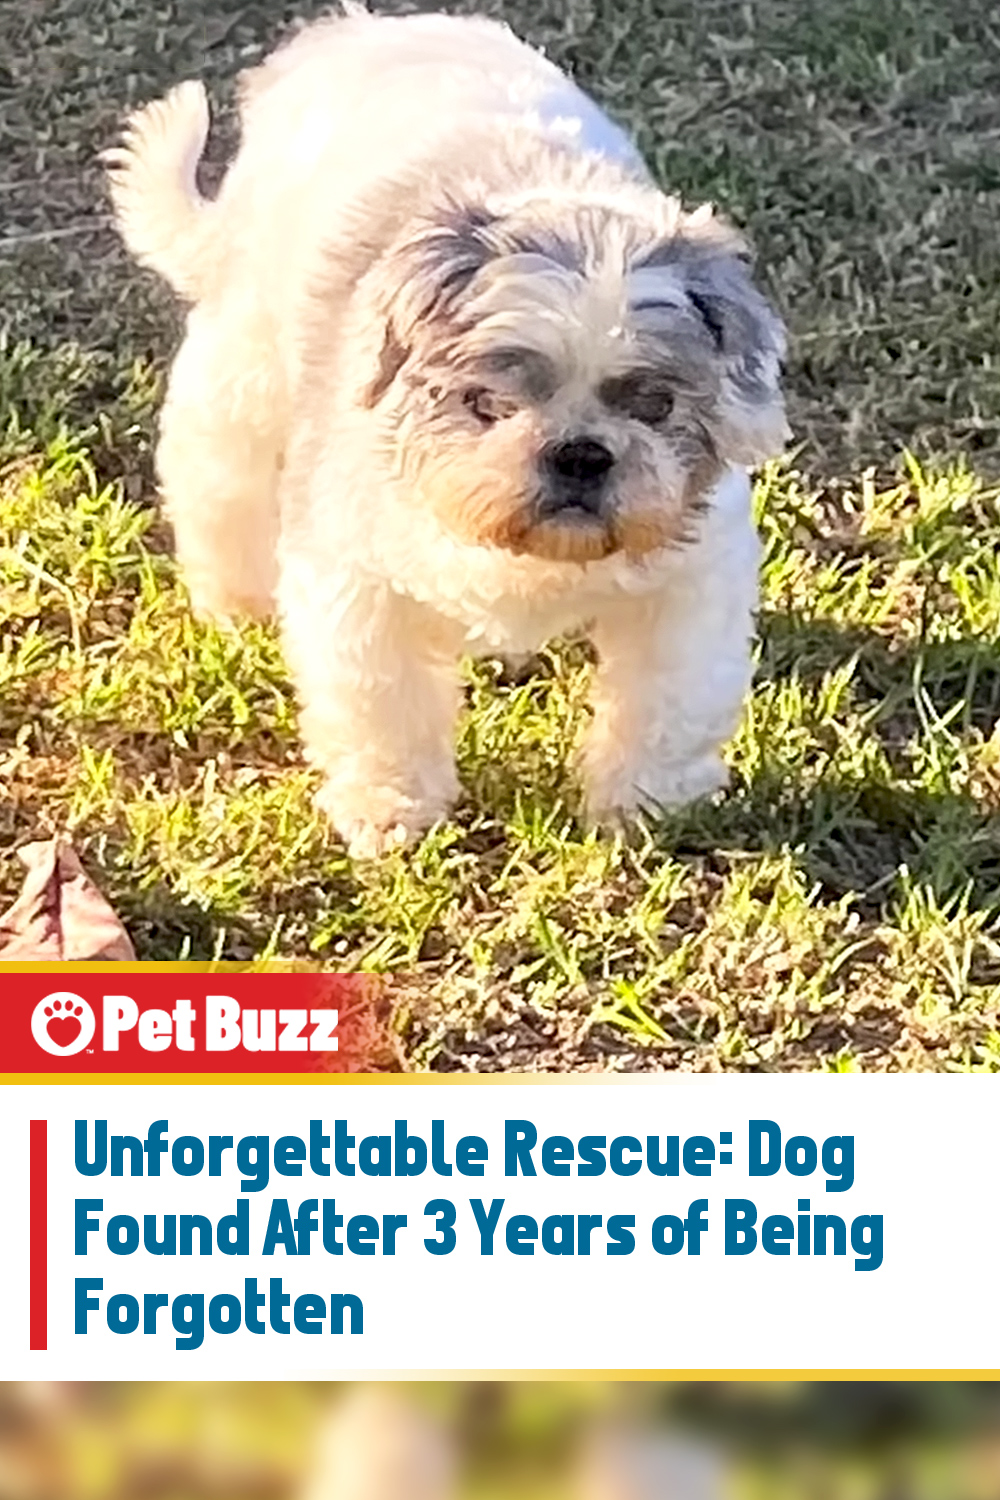 Unforgettable Rescue: Dog Found After 3 Years of Being Forgotten